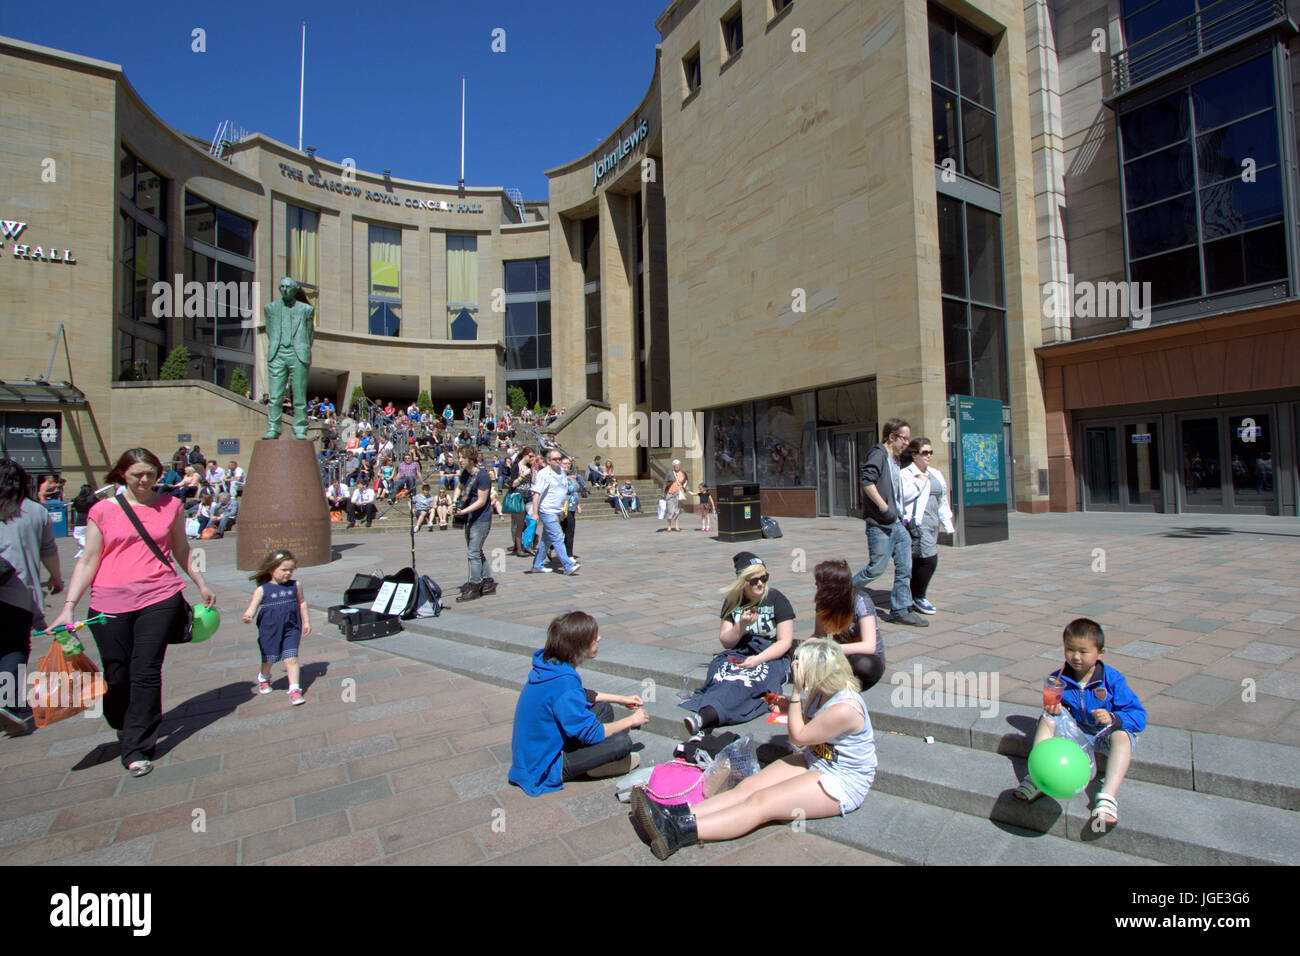 tourists and locals enjoy the sunny weather on the Sauchiehall street steps near the Donald Dewar statue Stock Photo